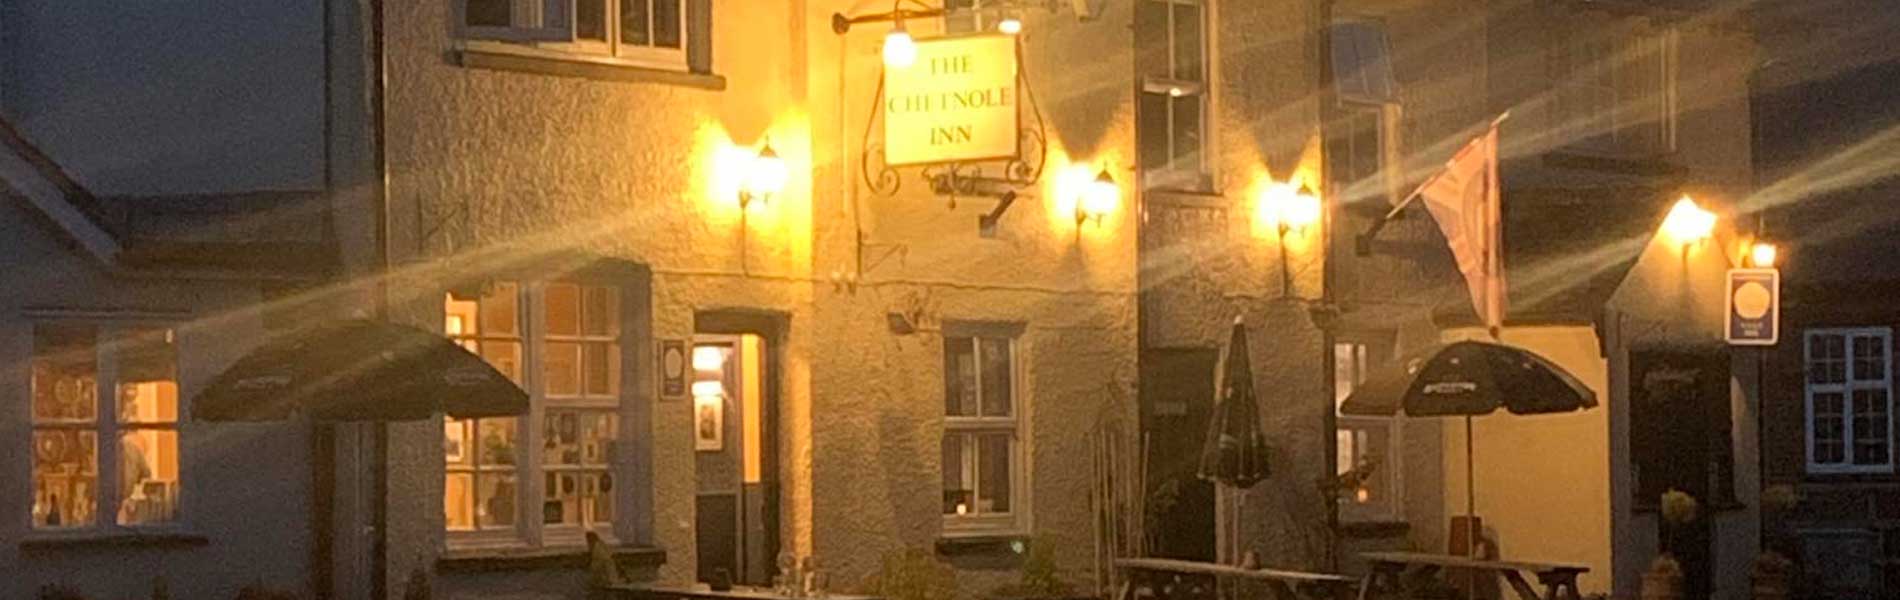 The Chetnole Inn - Pub Restaurant Bed & Breakfast. Tucked away in the beautiful Dorset countryside, close to Sherborne lies the Chetnole Inn. It is the perfect base to discover picturesque Dorset, Dorchester